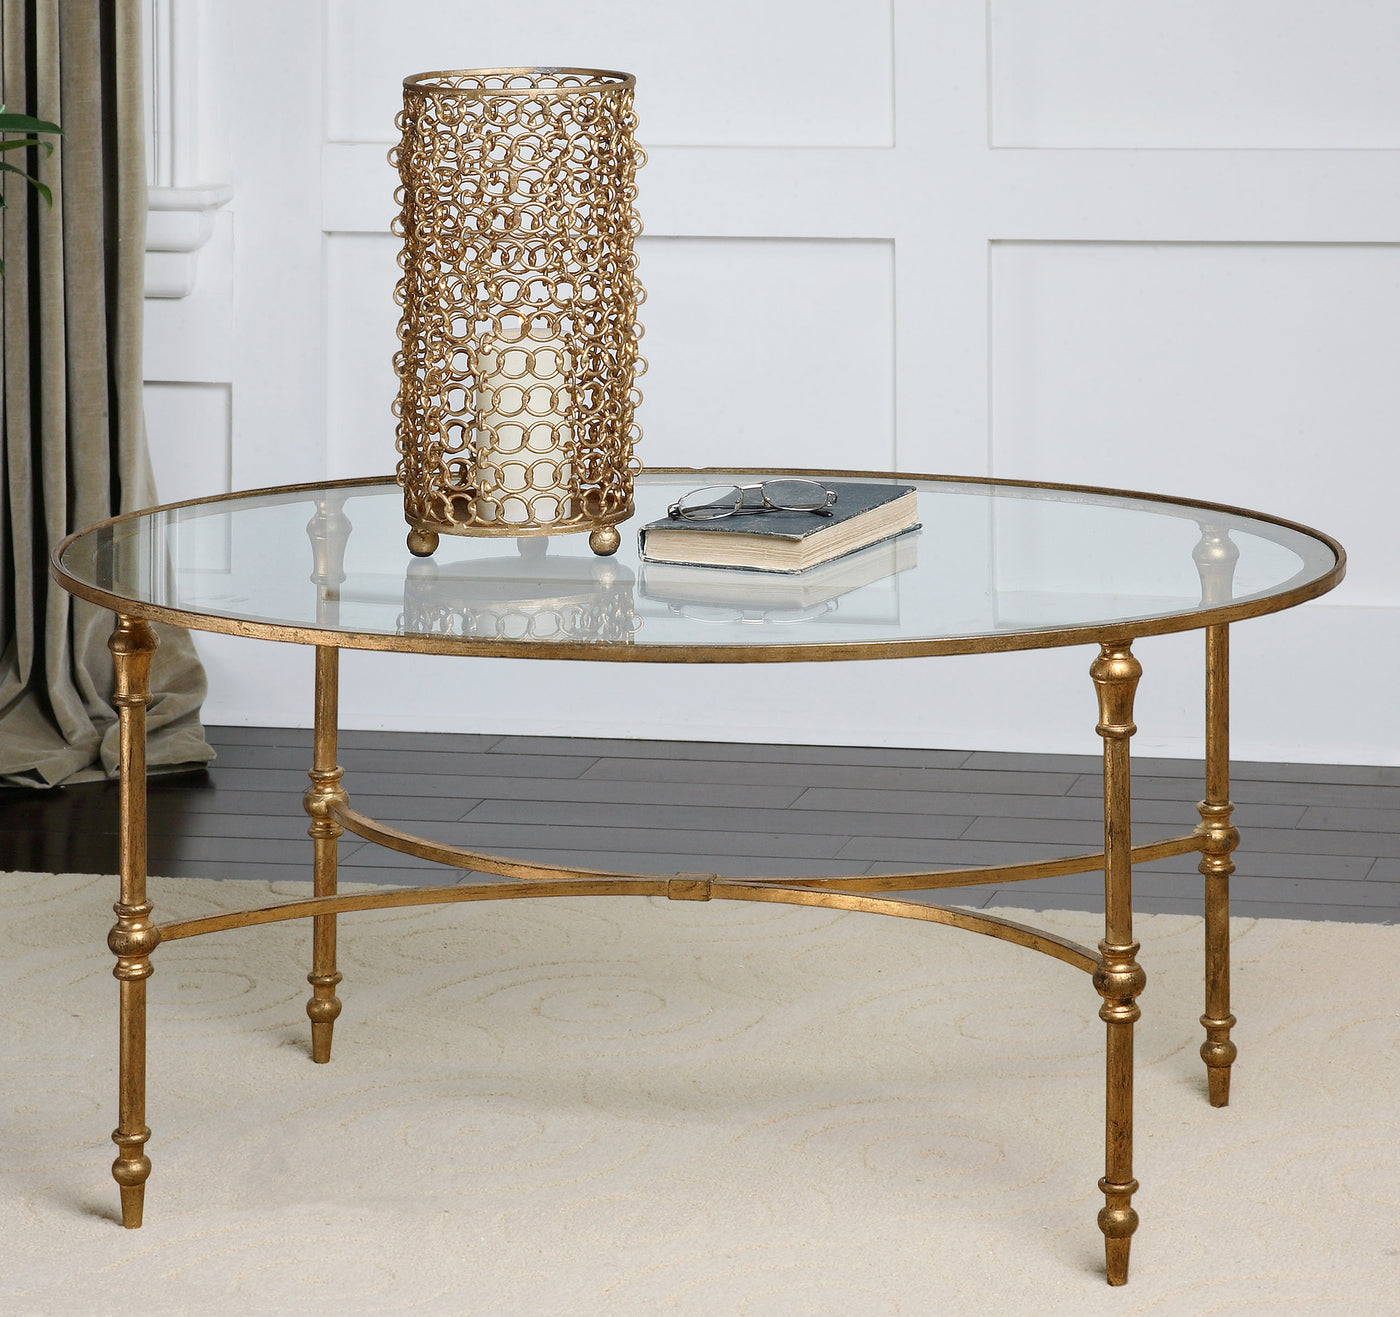 A Graceful, Oval Design Finished In Antiqued Gold Leaf Under Sturdy, Clear Tempered Glass.